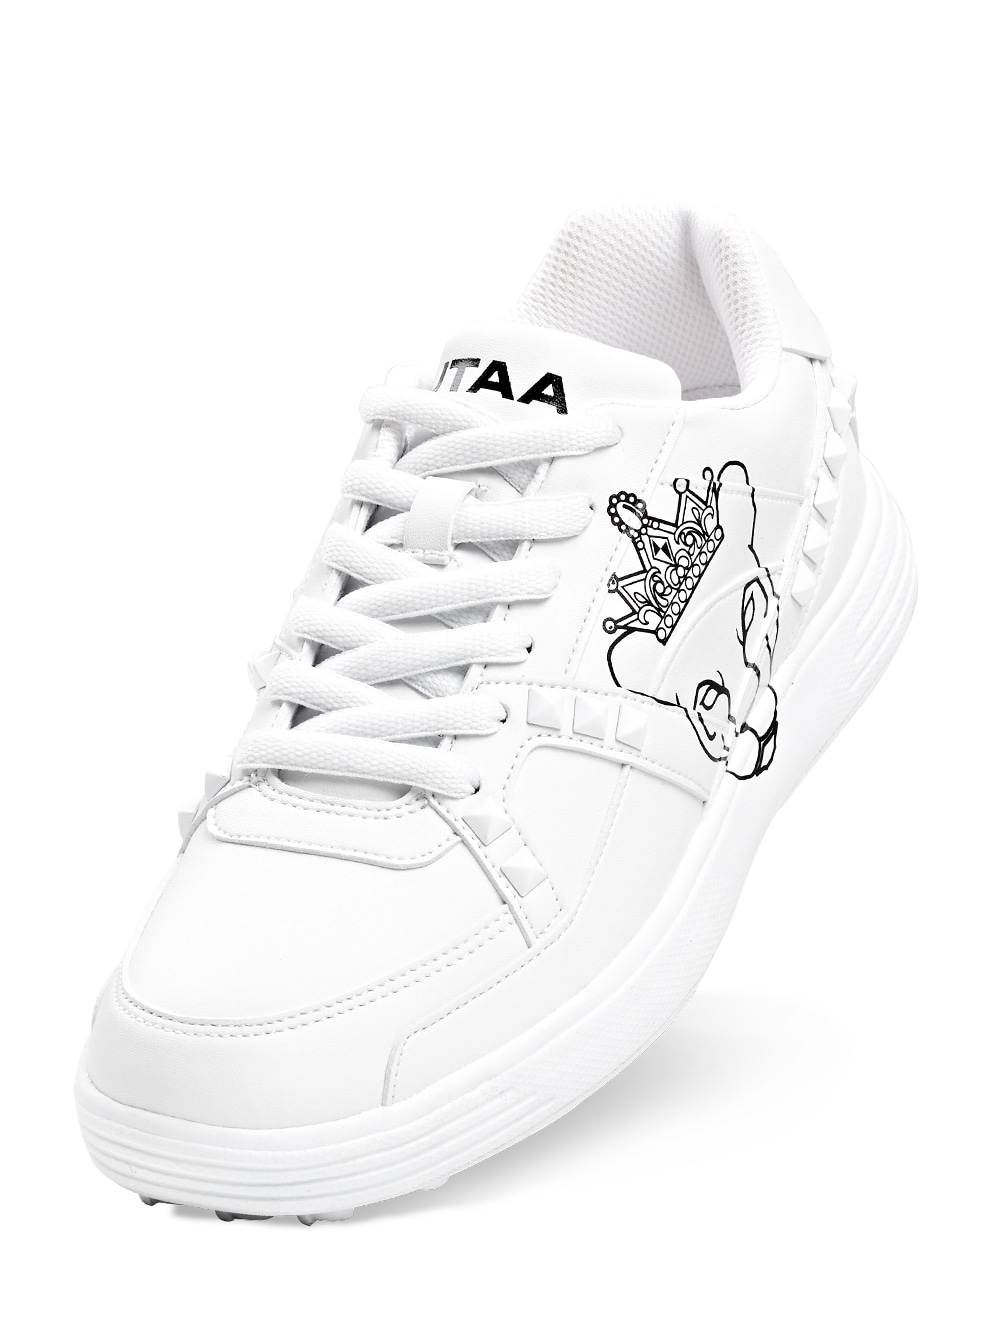 UTAA Crown Panther Golf Sneakers : Women&#039;s (UB0GHF102WH)